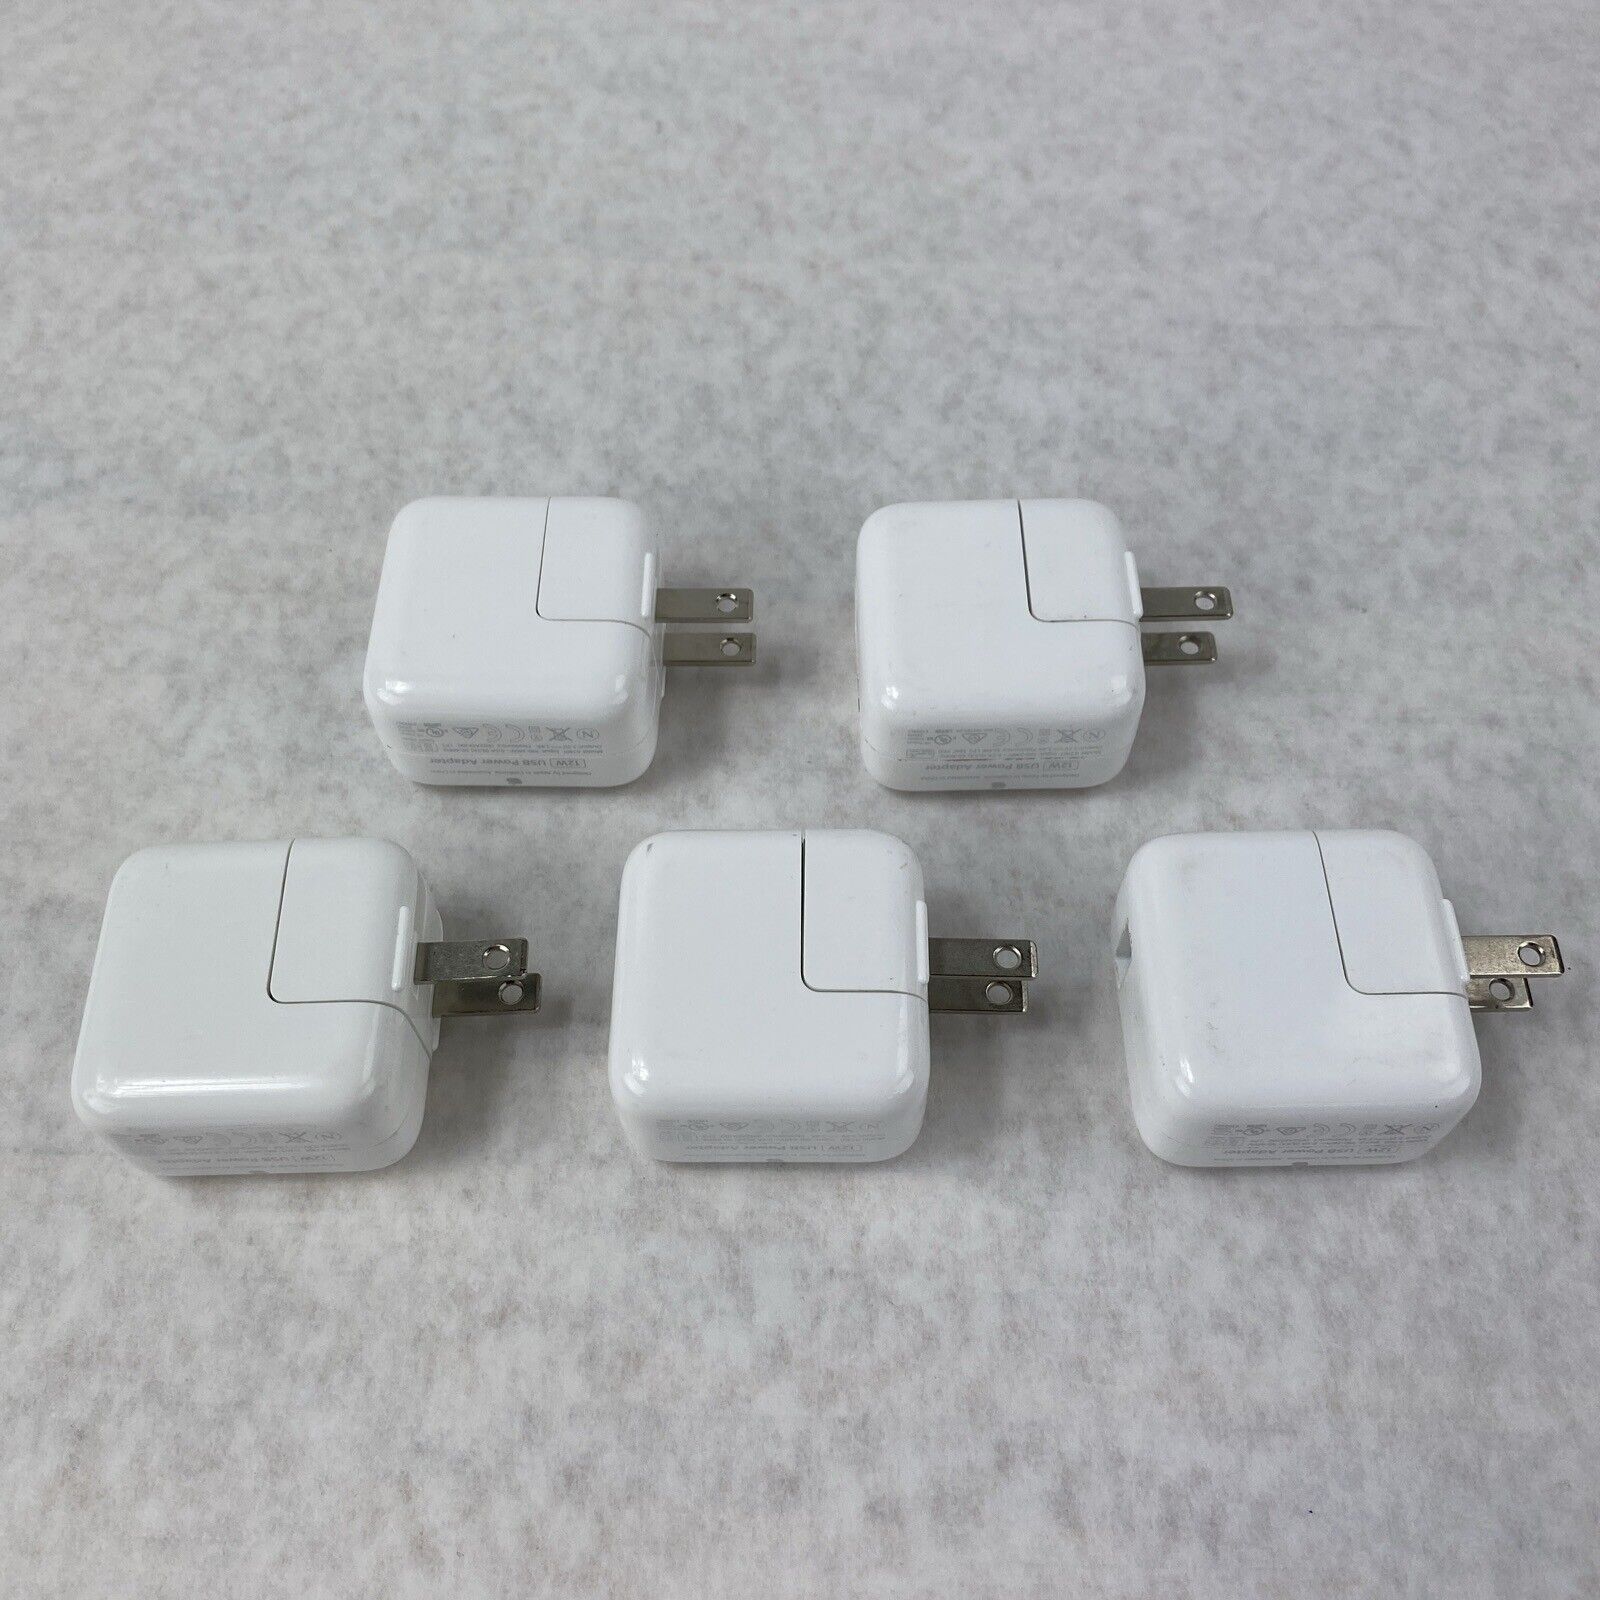 Lot of 5 Genuine Apple A1401 USB Power Adapter 12W